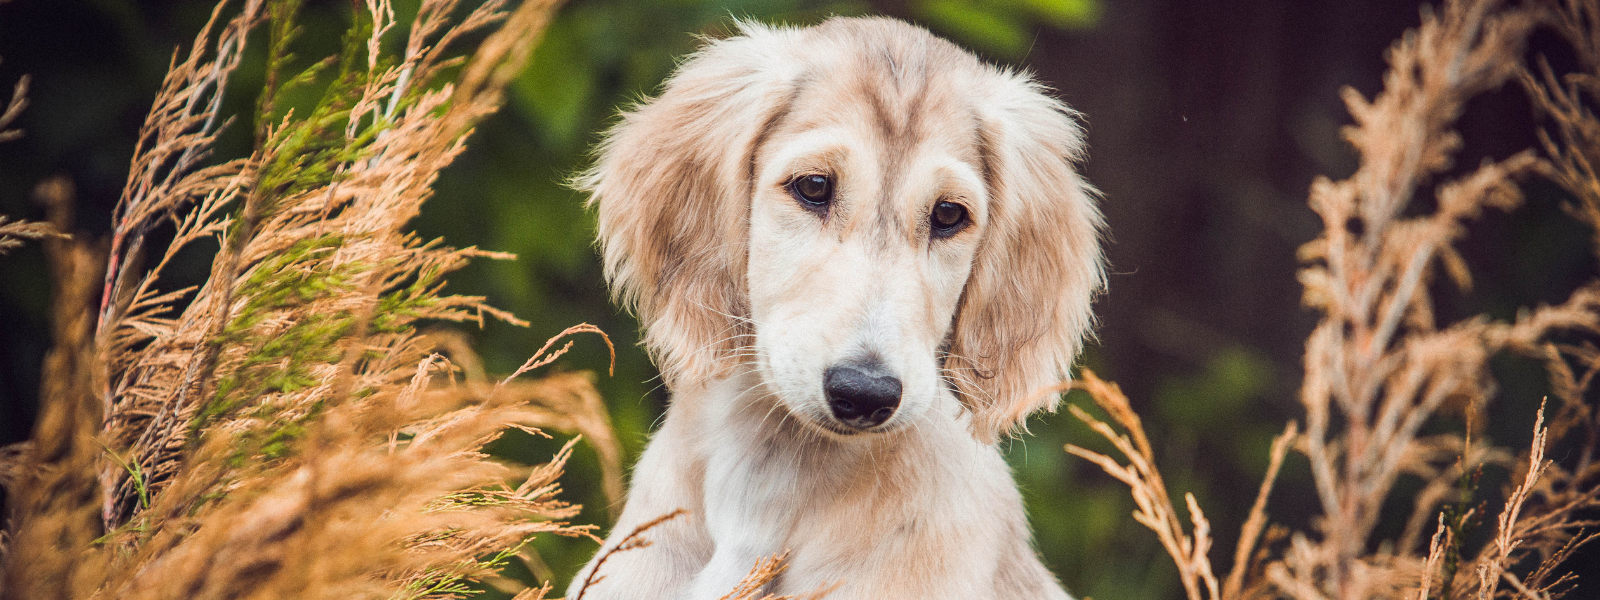 How to treat a puppy with a rash